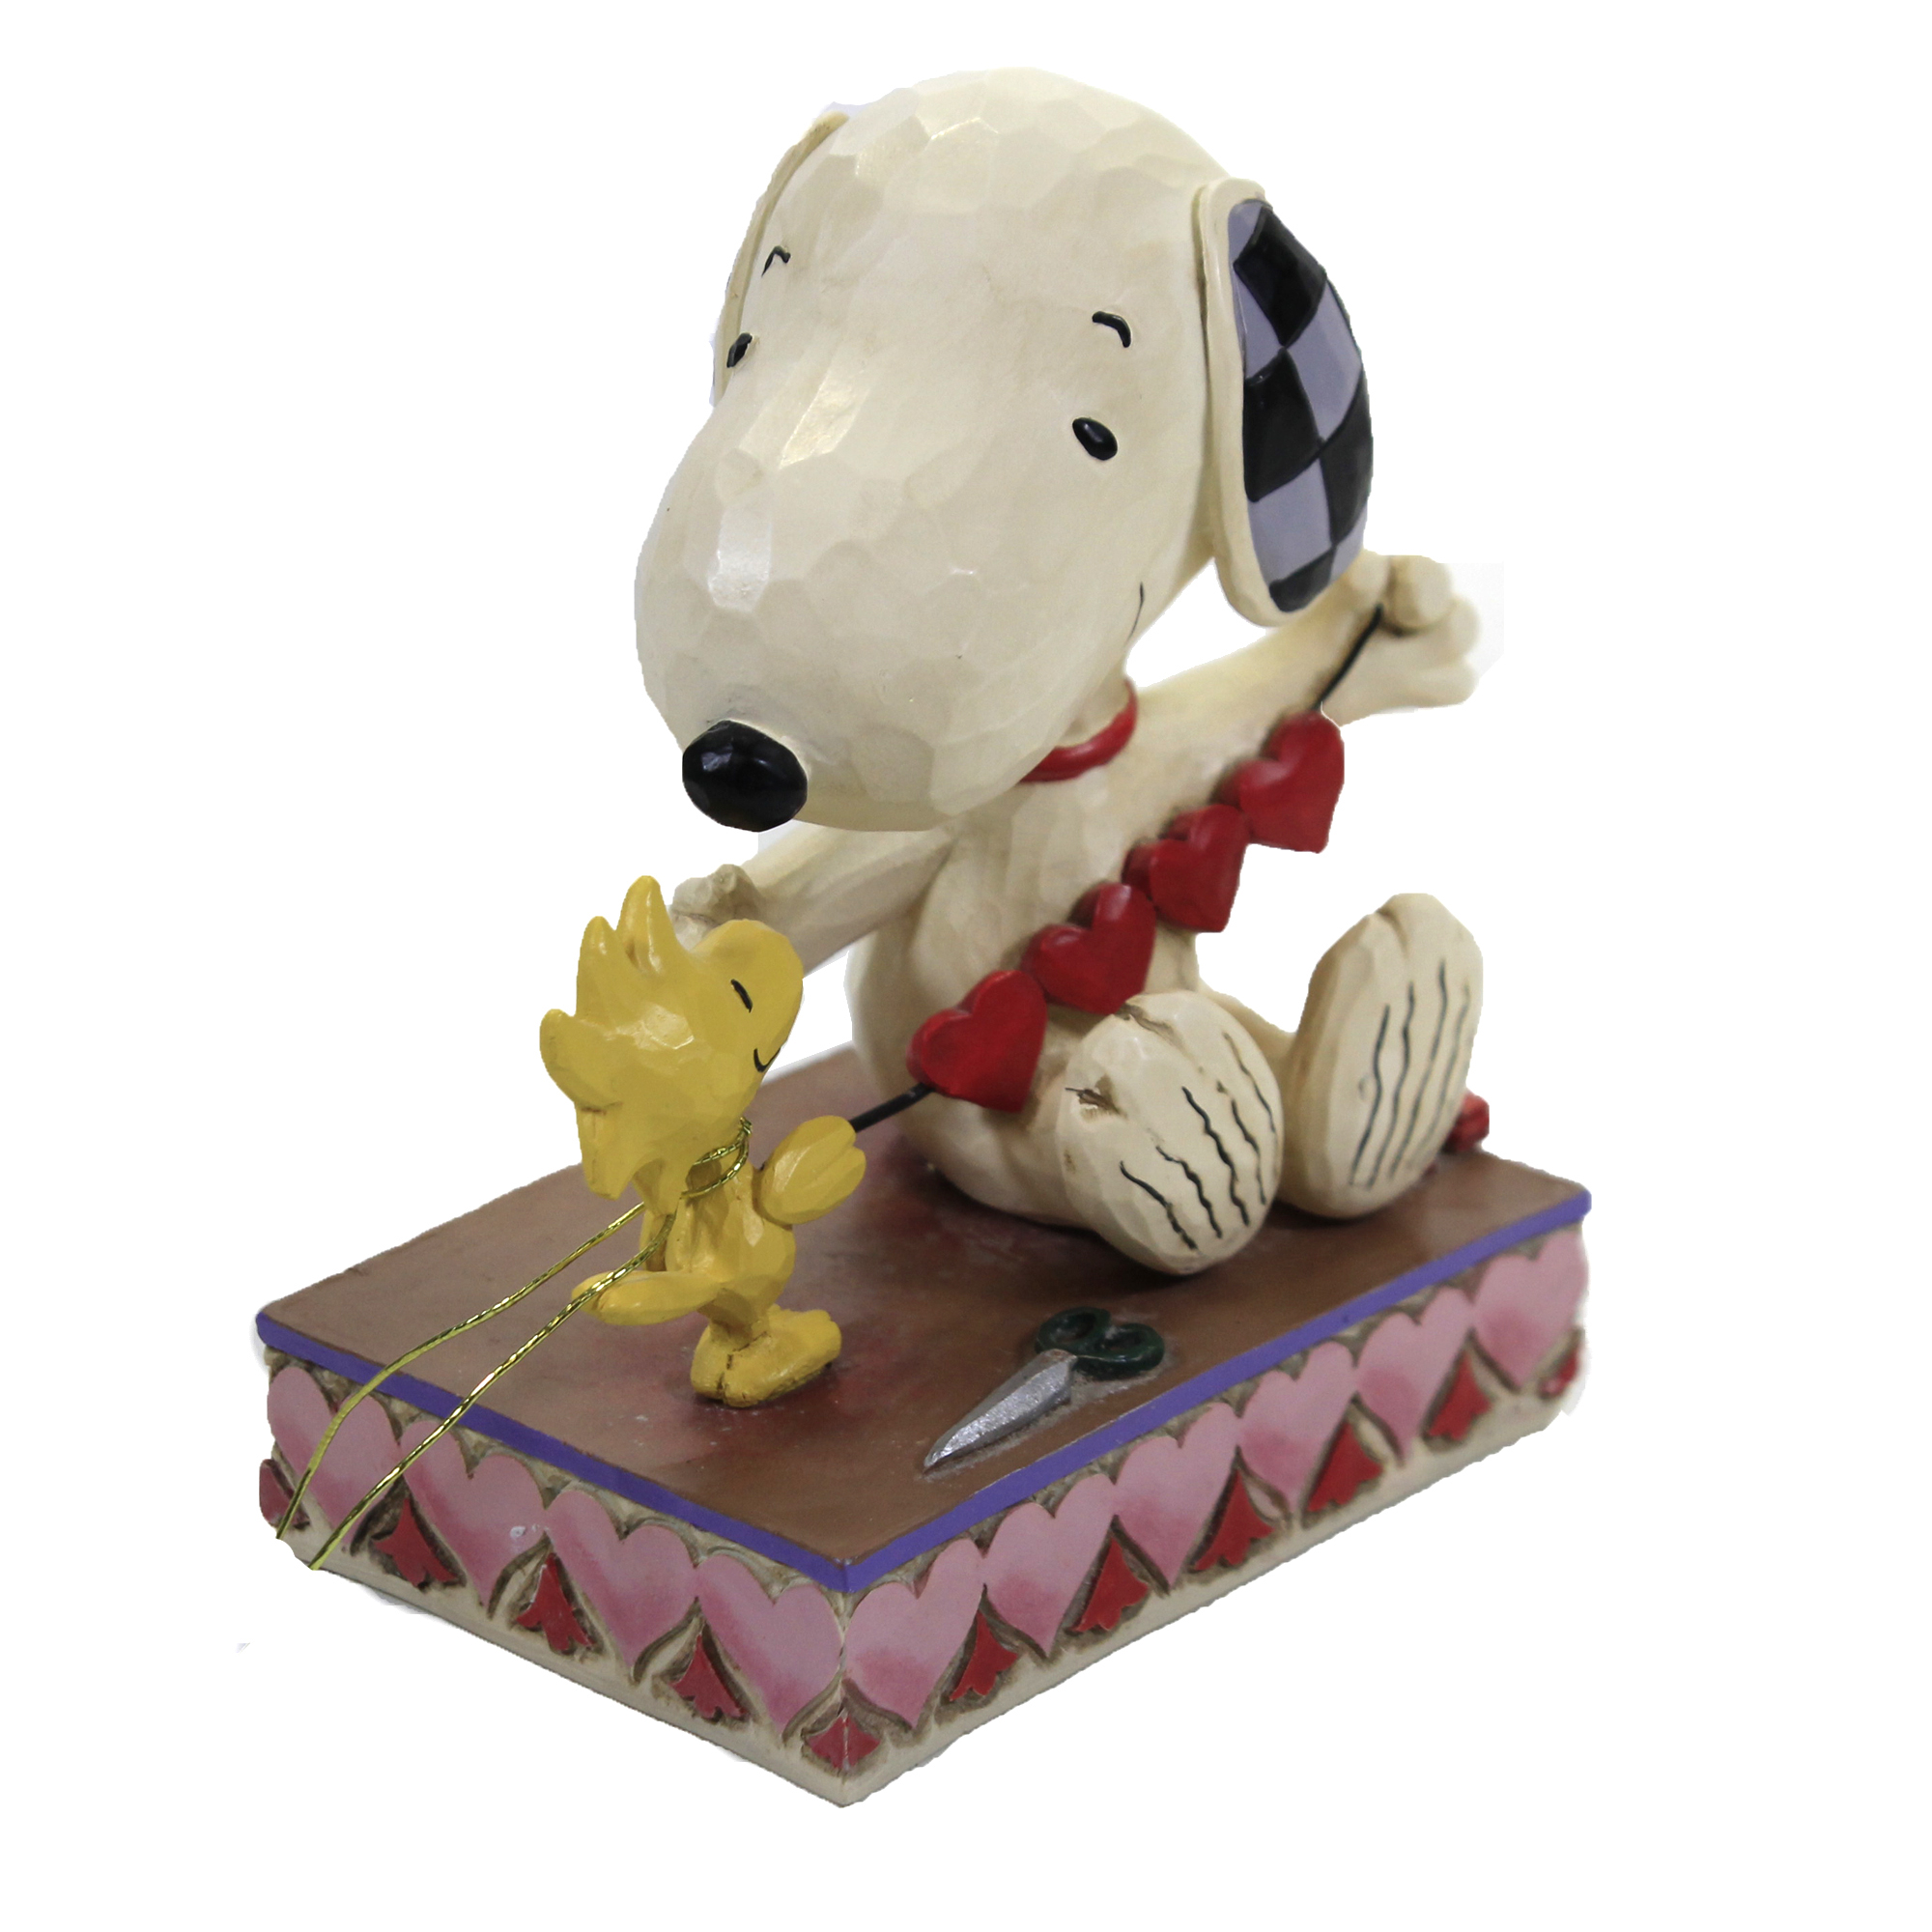 Enesco Peanuts by Jim Shore Woodstock and Snoopy with Heart